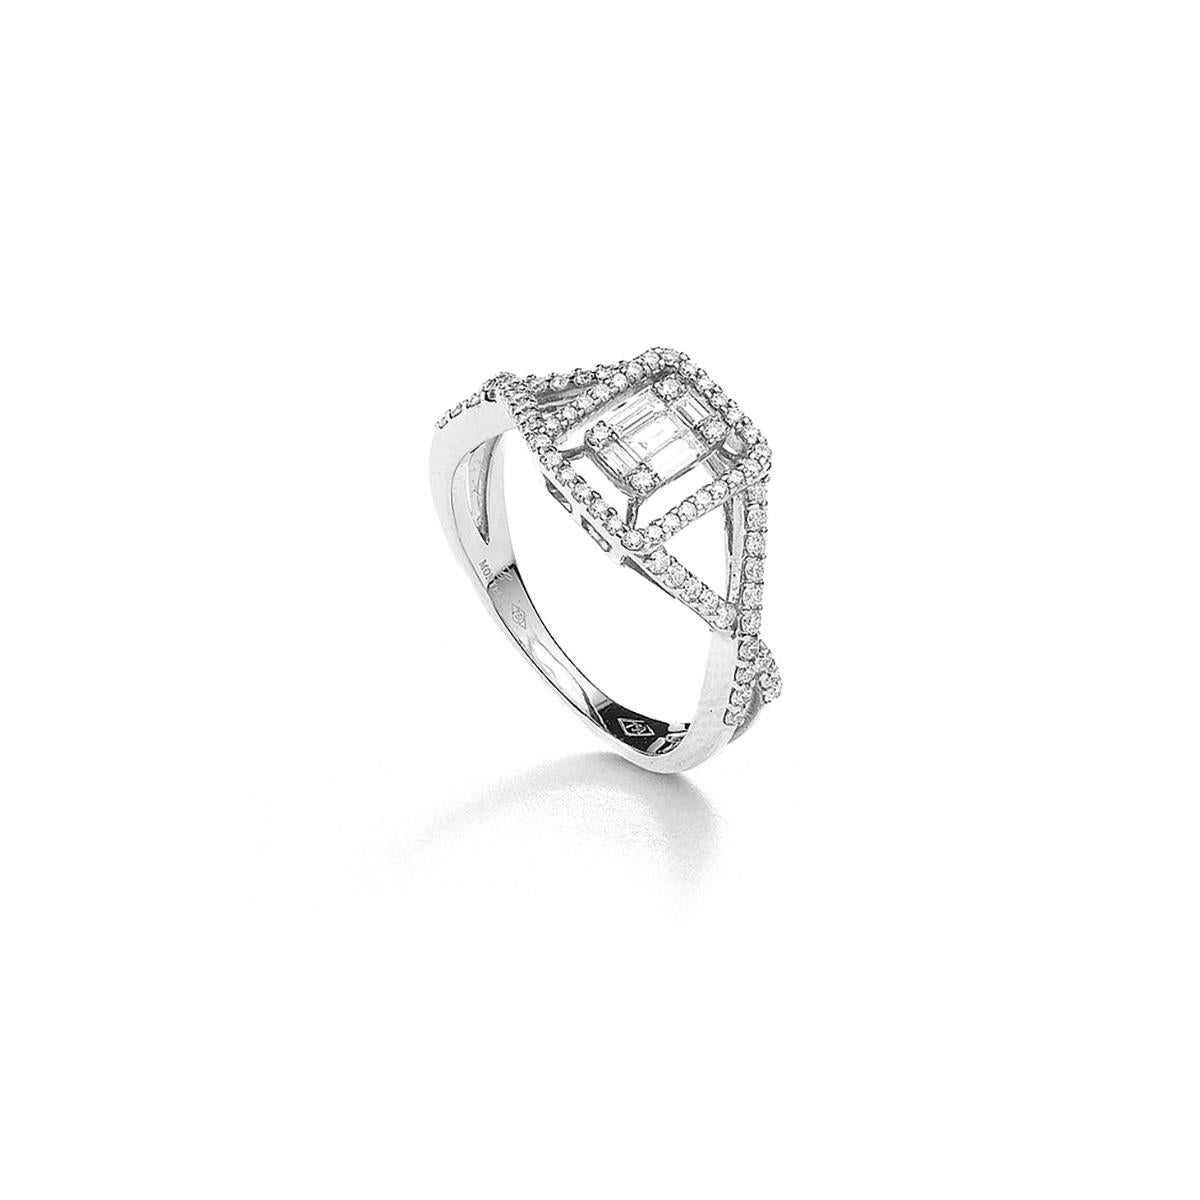 Ring in 18kt white gold set with 5 baguette cut diamonds 0.15 cts and 68 diamonds 0.40 cts Size 51